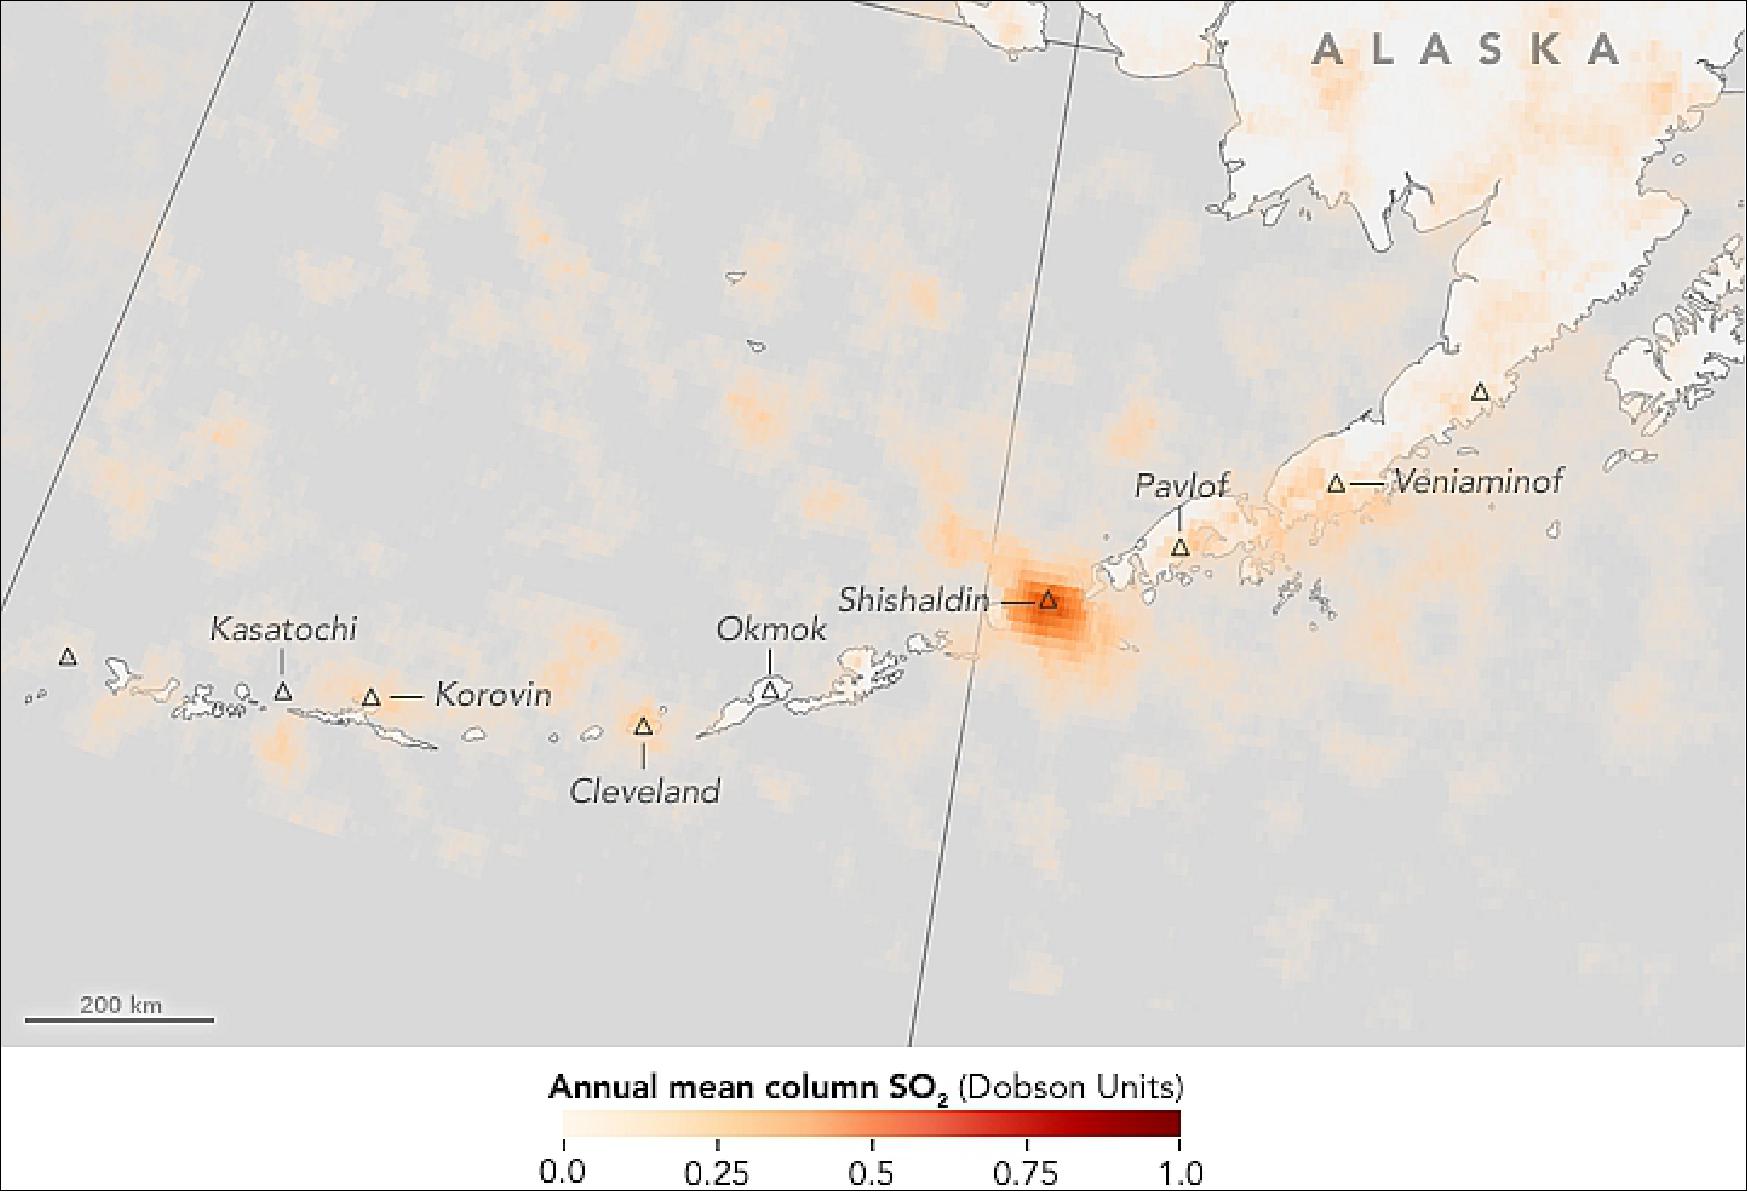 Figure 41: Mean SO2 columns (in Dobson Units [DU]; 1 DU = 2.69 x 1016 molecules cm-2) acquired with OMI (Ozone Monitoring Instrument) on NASA's Aura satellite during the period 2014-2016 over the Aleutian Islands (image credit: NASA Earth Observatory, maps created by Jesse Allen using OMI data provided by Chris McLinden, caption by Allison Mills)